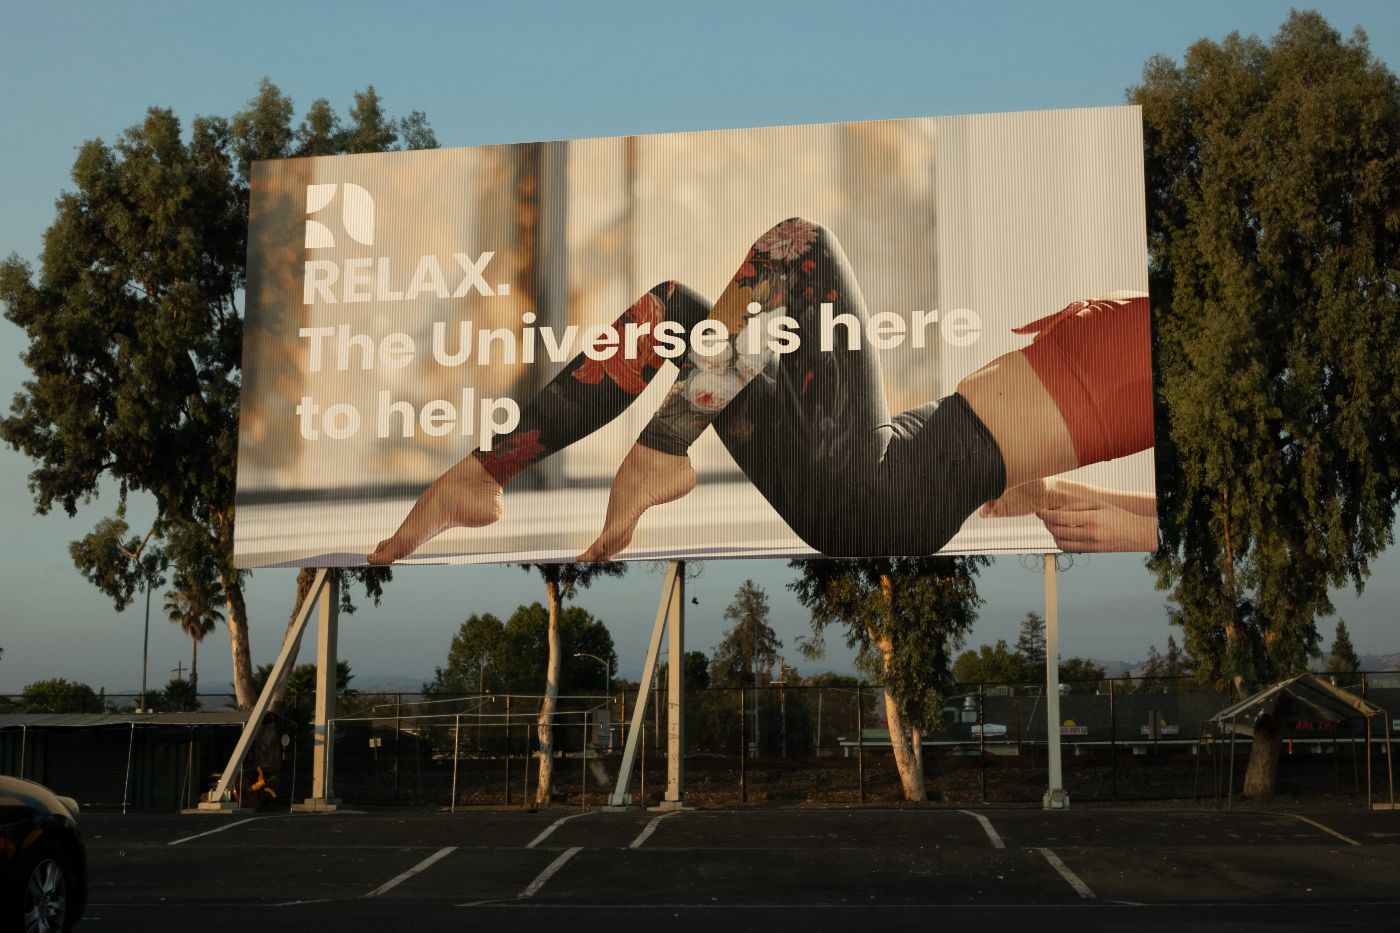 Relax_Billboard_universe_is_her_to_help.png